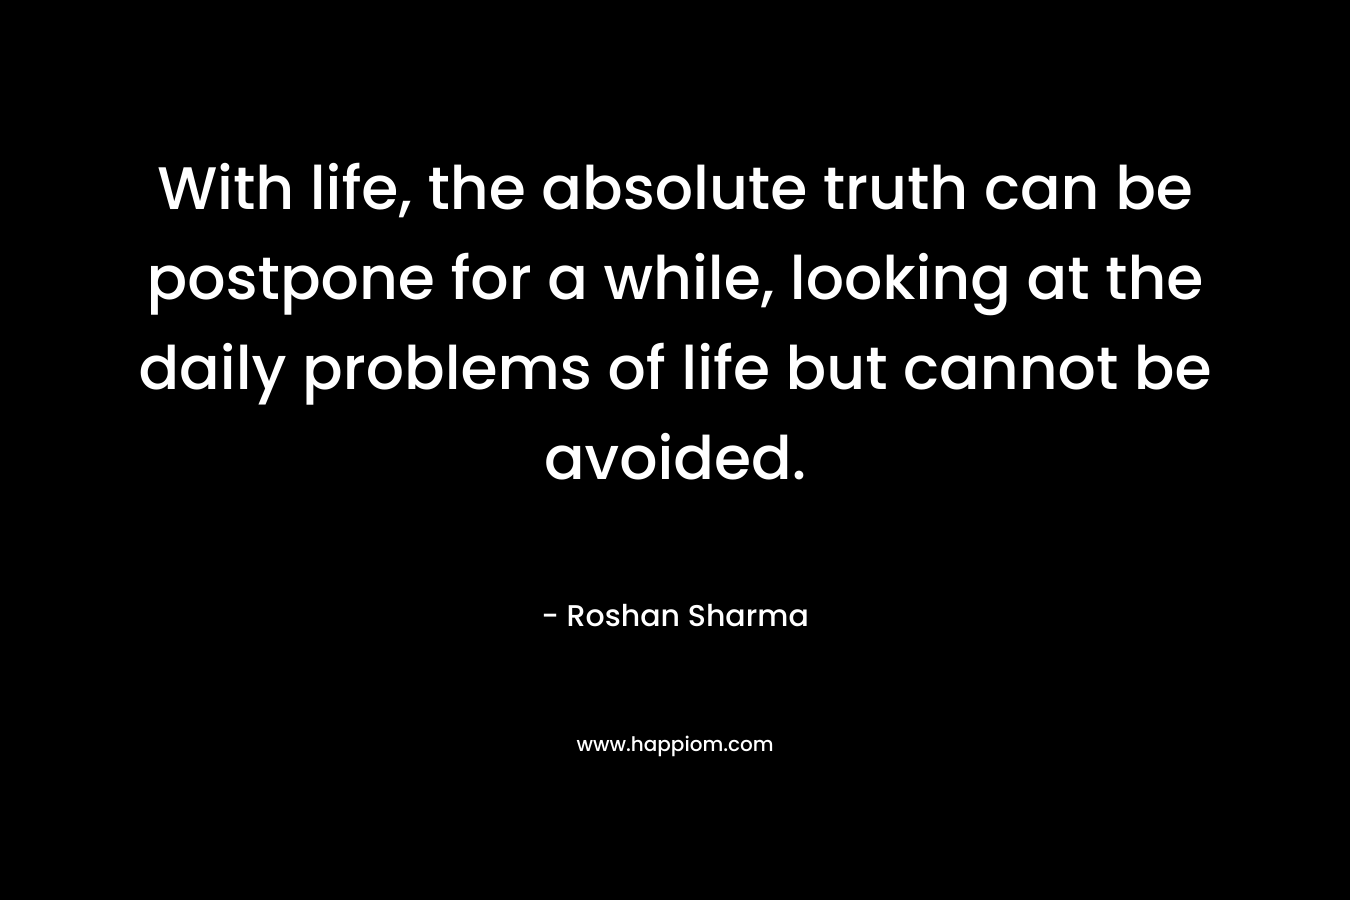 With life, the absolute truth can be postpone for a while, looking at the daily problems of life but cannot be avoided. – Roshan Sharma